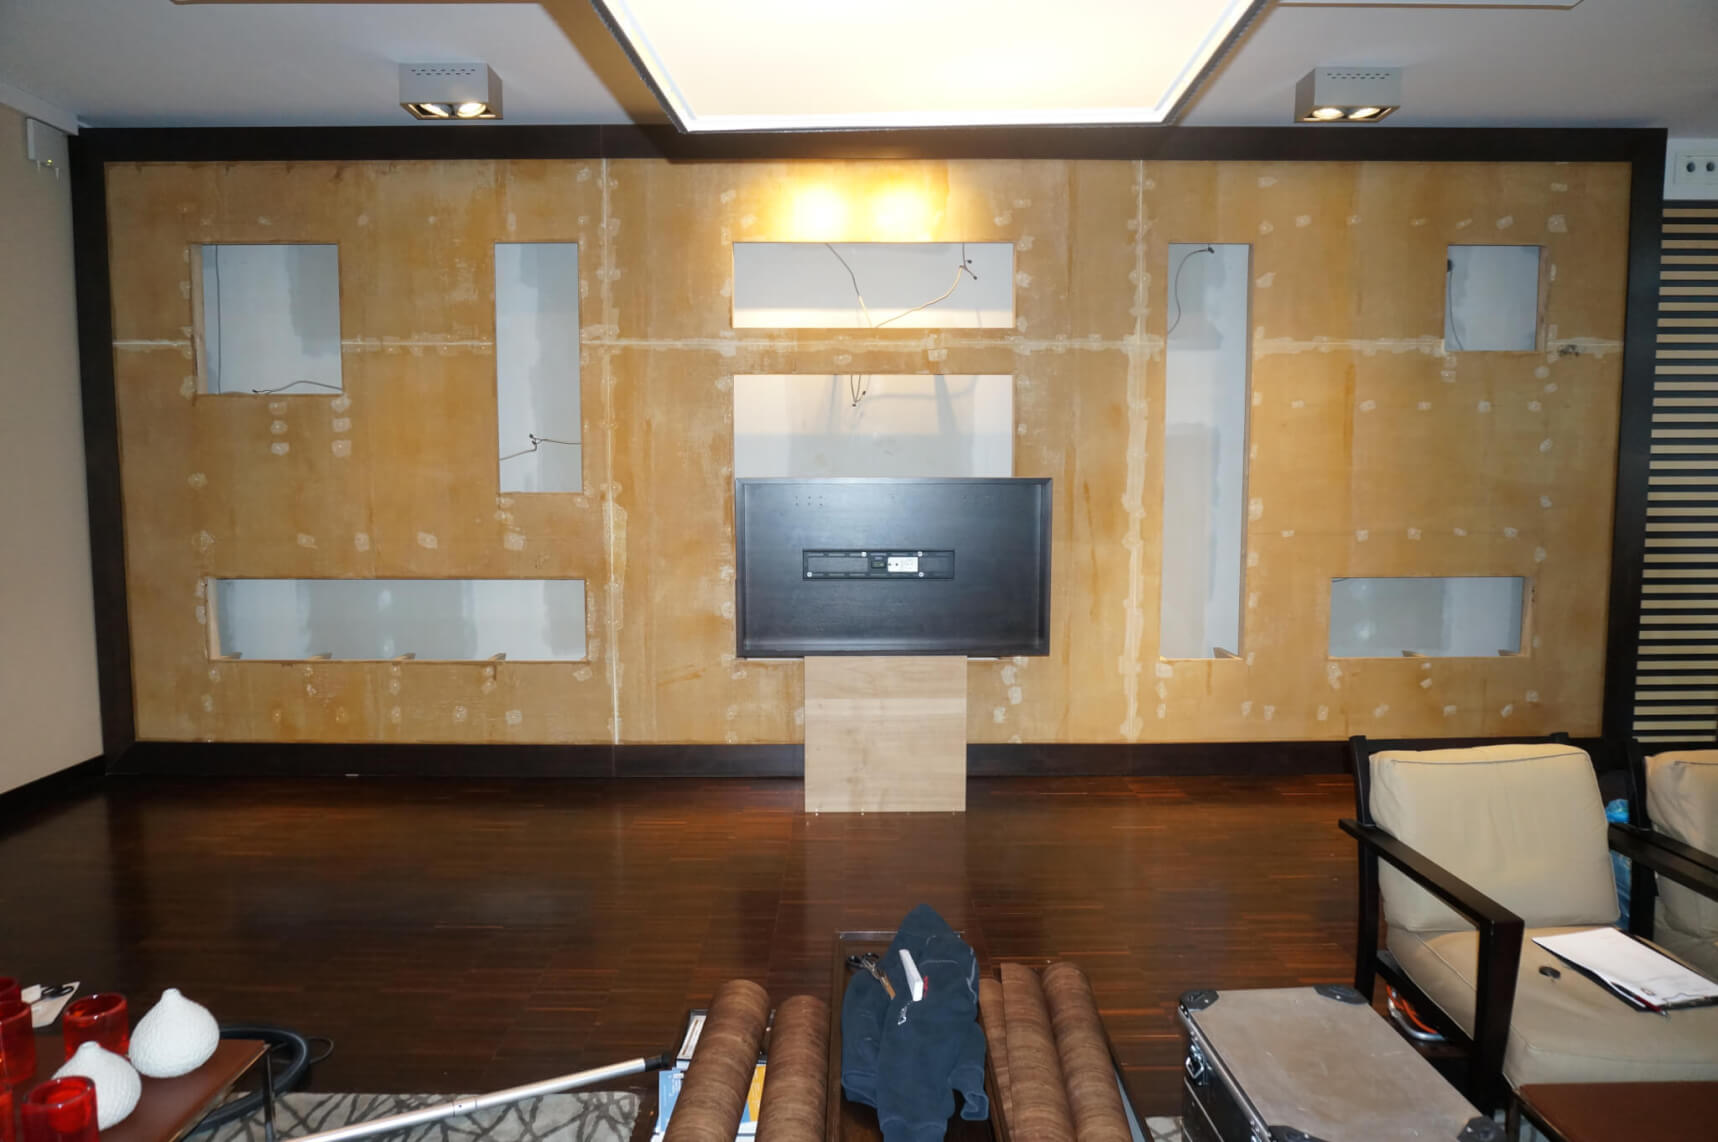 Covering a wall in the lobby with film, pictures, cost - before